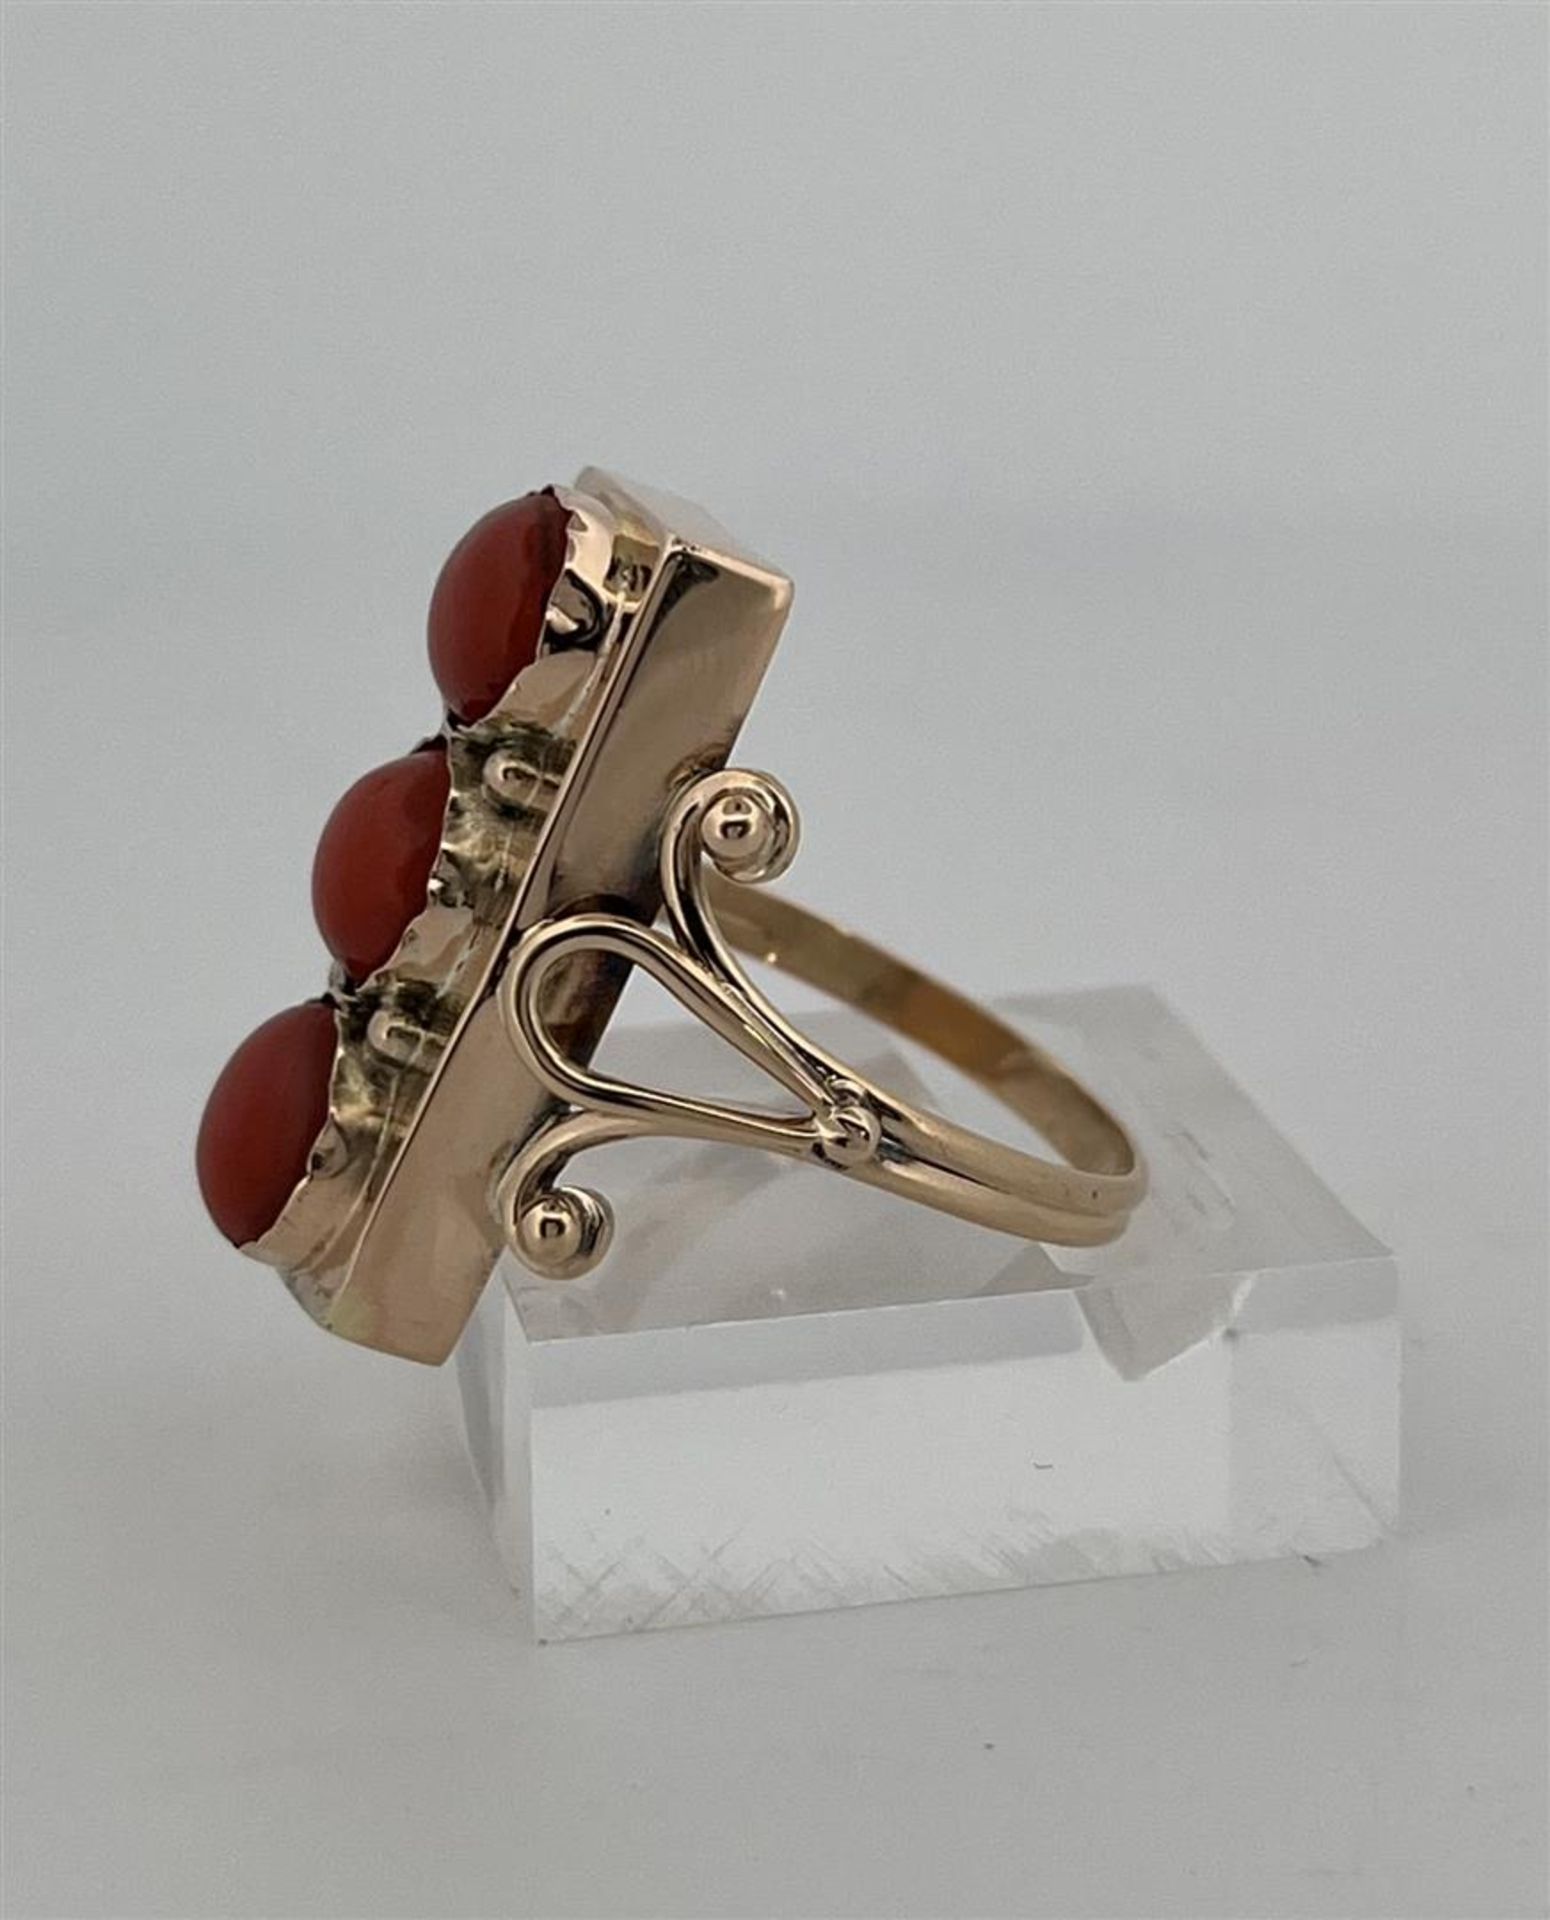 14kt yellow gold 3-stone ring set with red coral.
The ring is set with 3 round cabochon cut red cora - Image 3 of 7